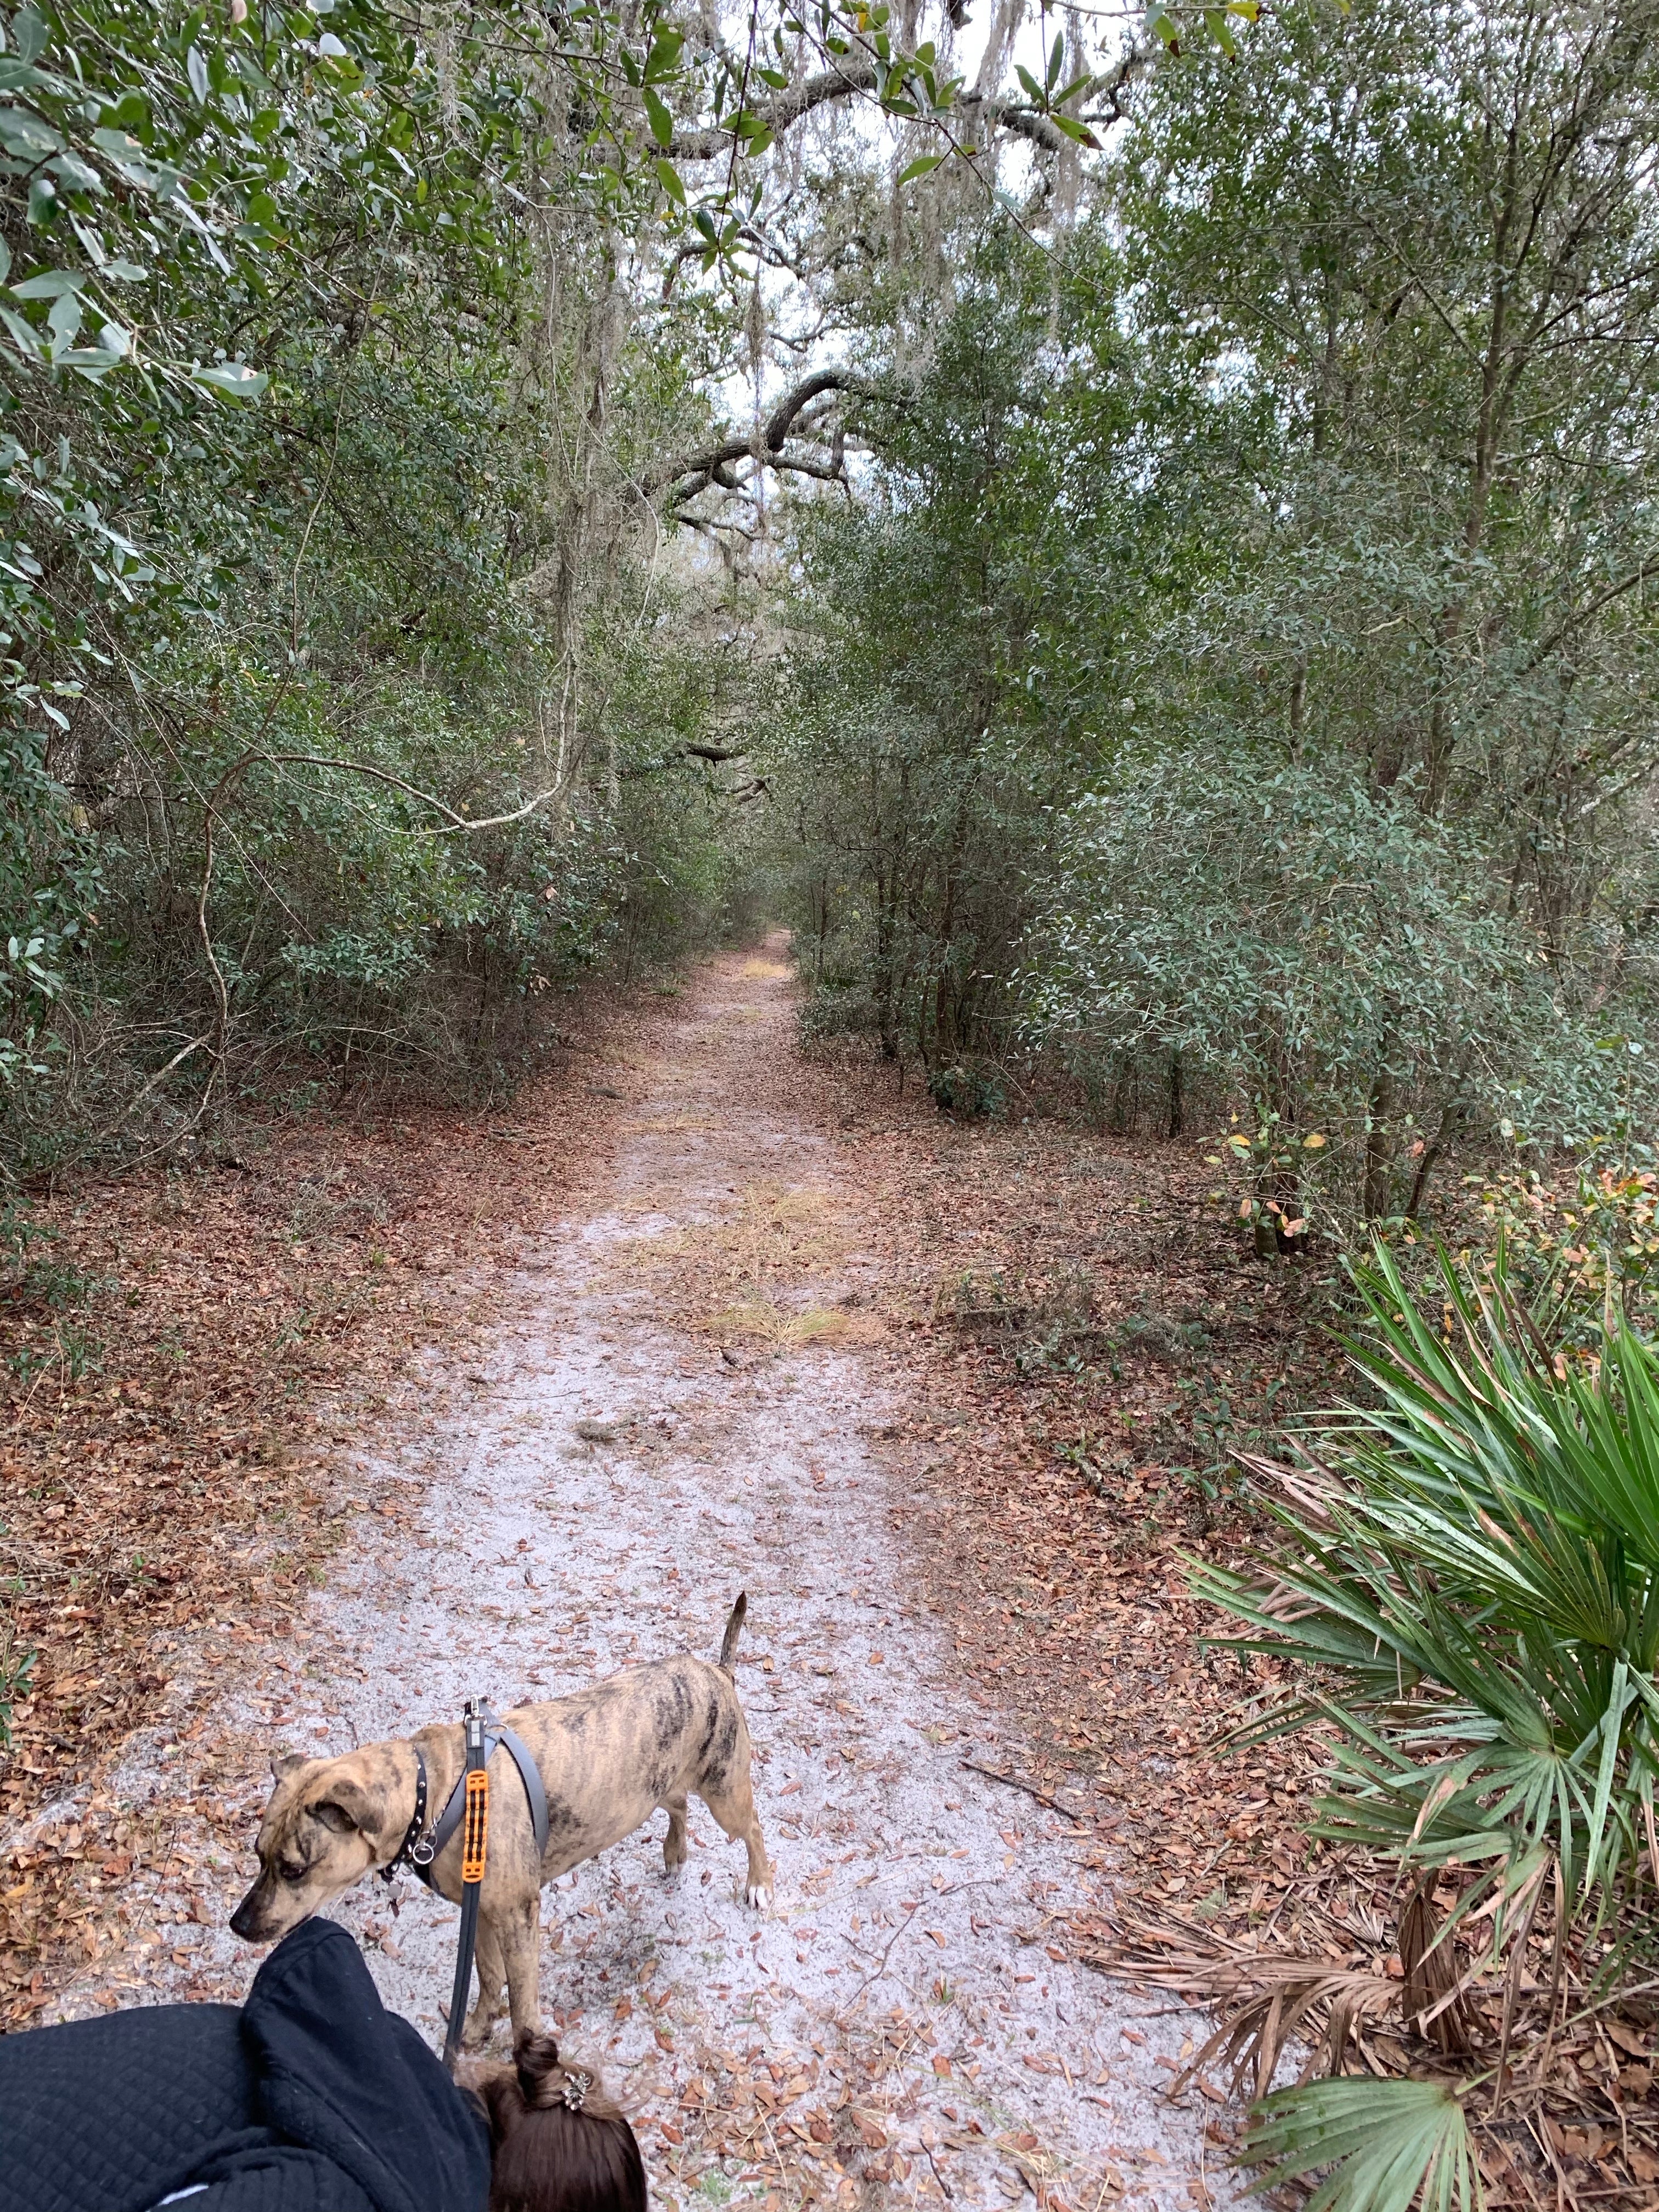 Camper submitted image from Pasco County - Crews Lake Wilderness Park - 2